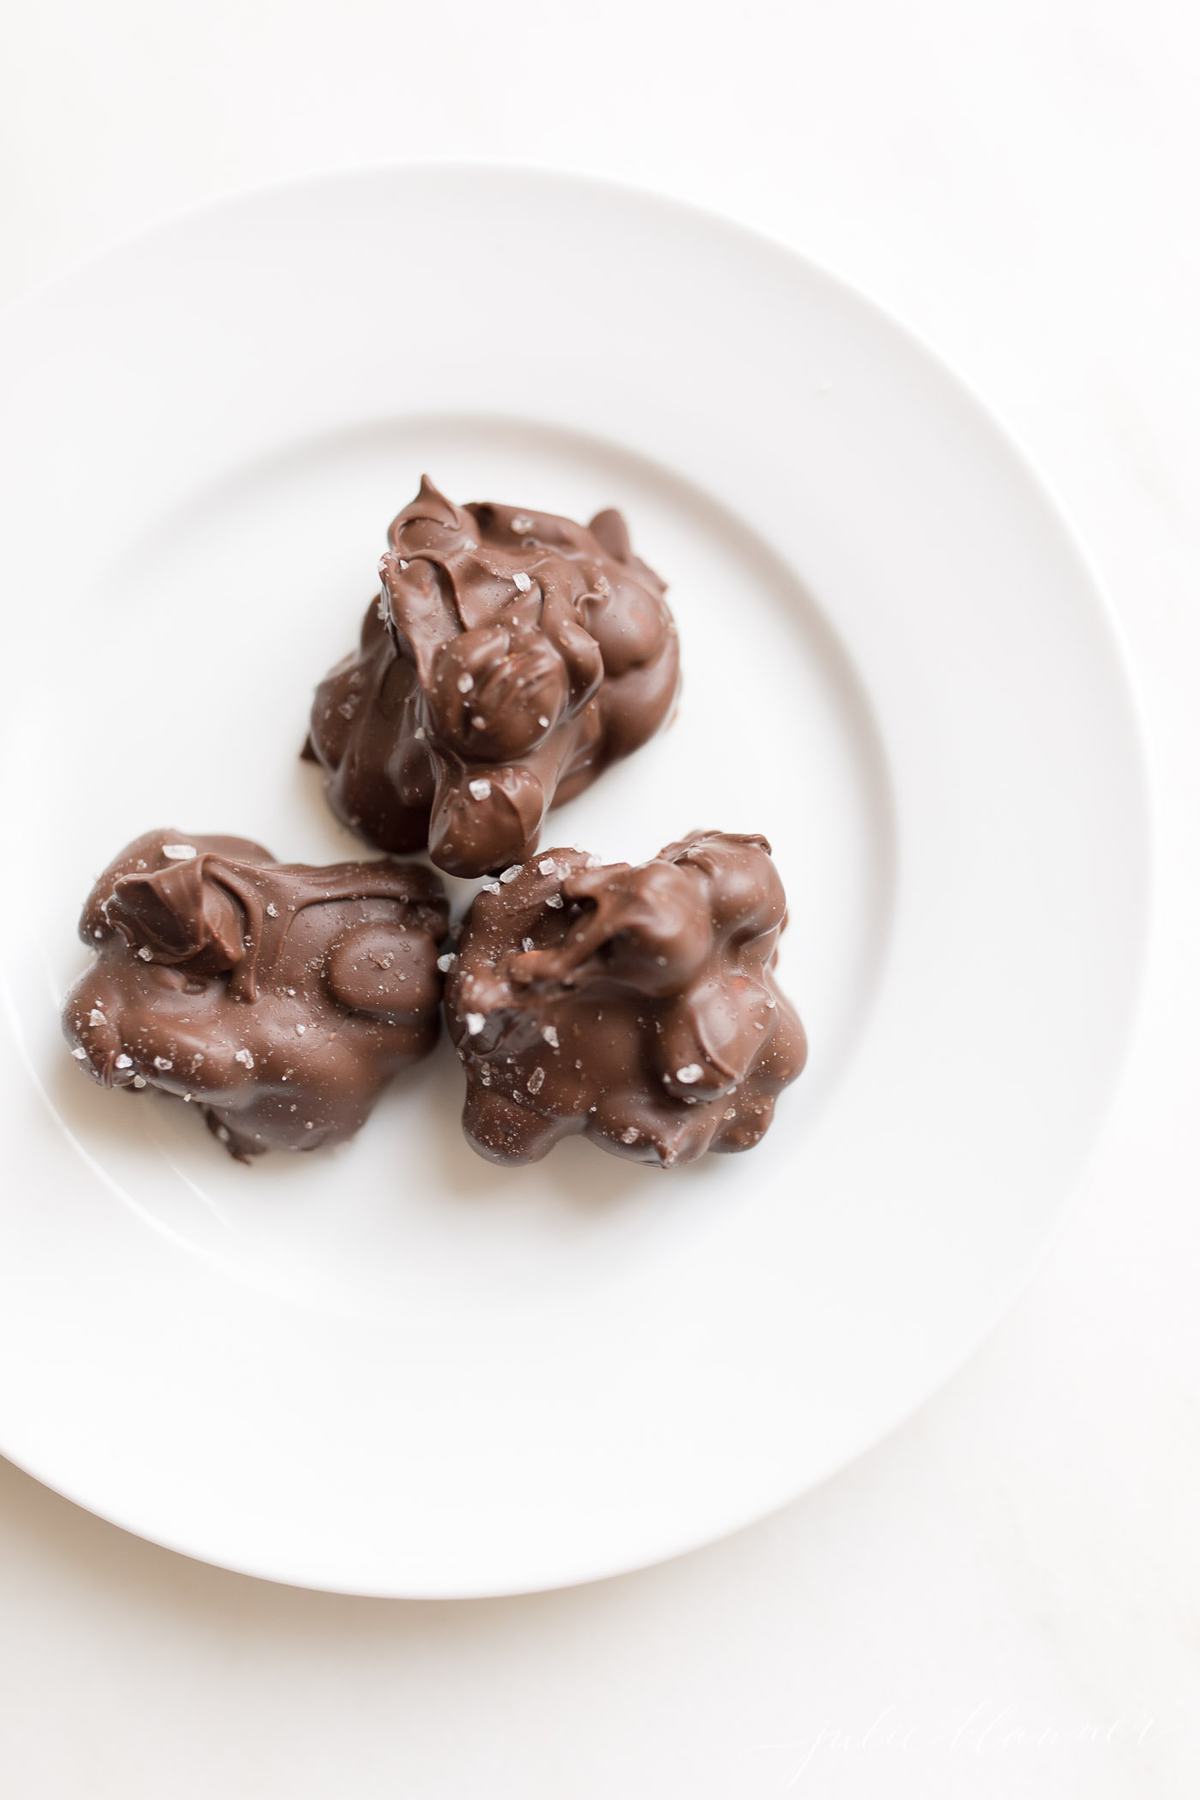 3 peanut clusters on a white plate